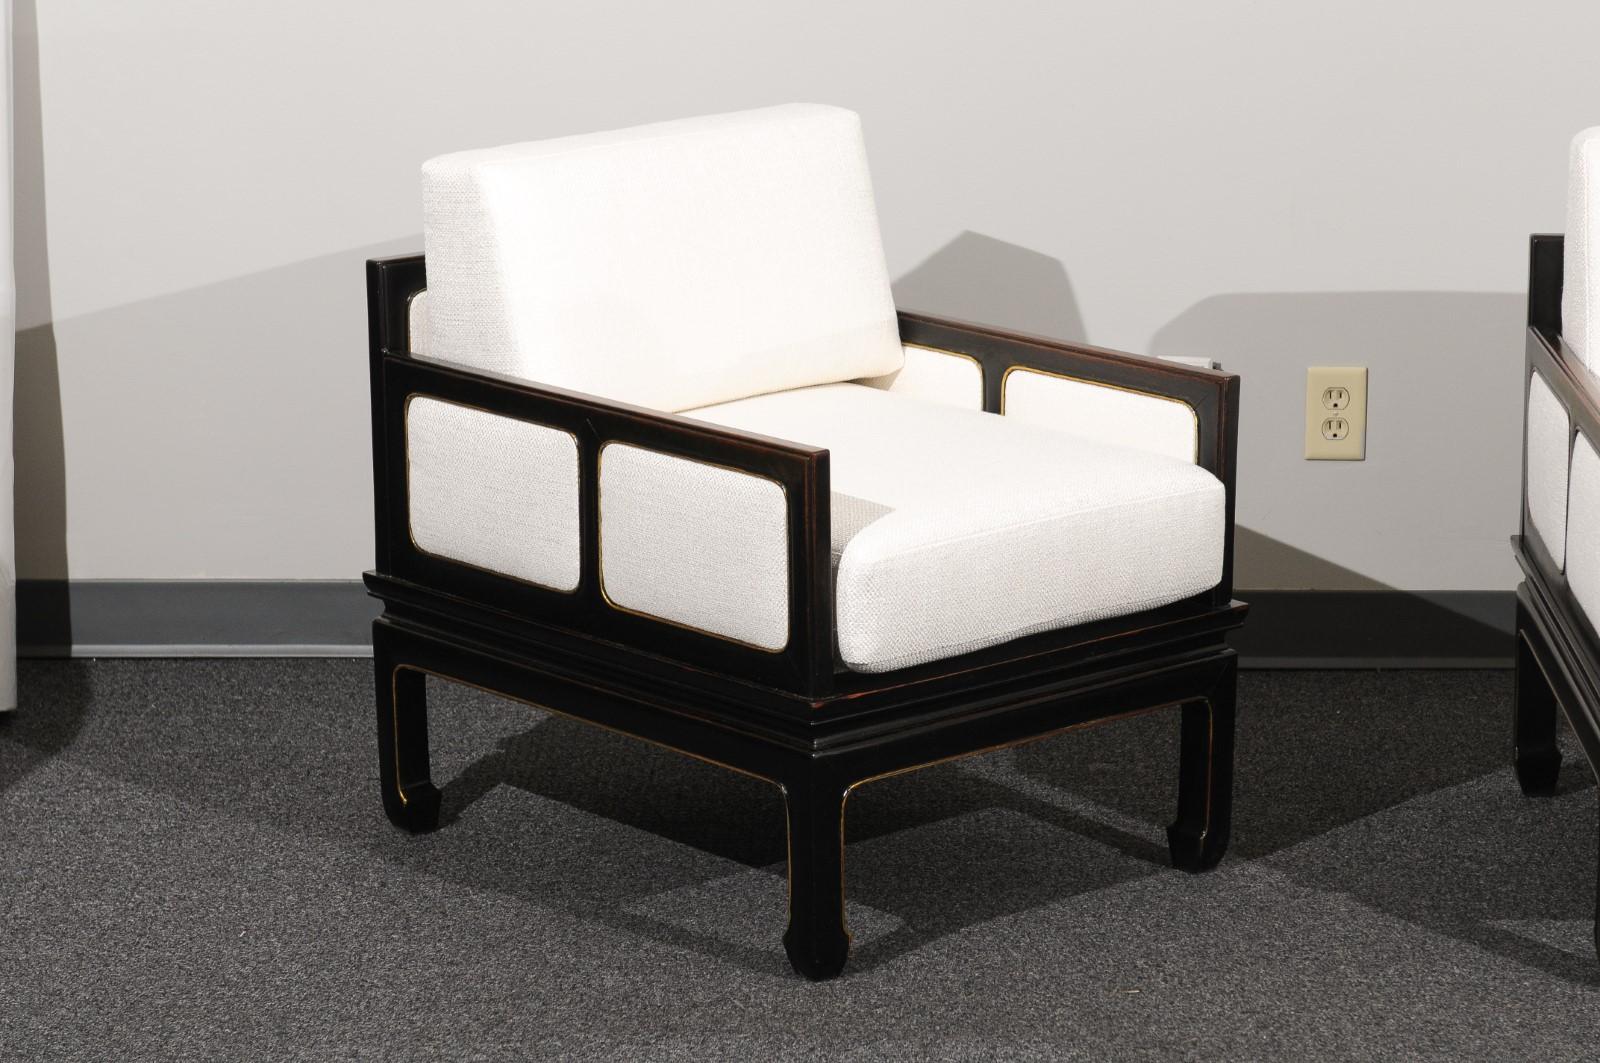 American Sophisticated Restored Pair of Lounge Chairs by Baker Furniture, circa 1960 For Sale